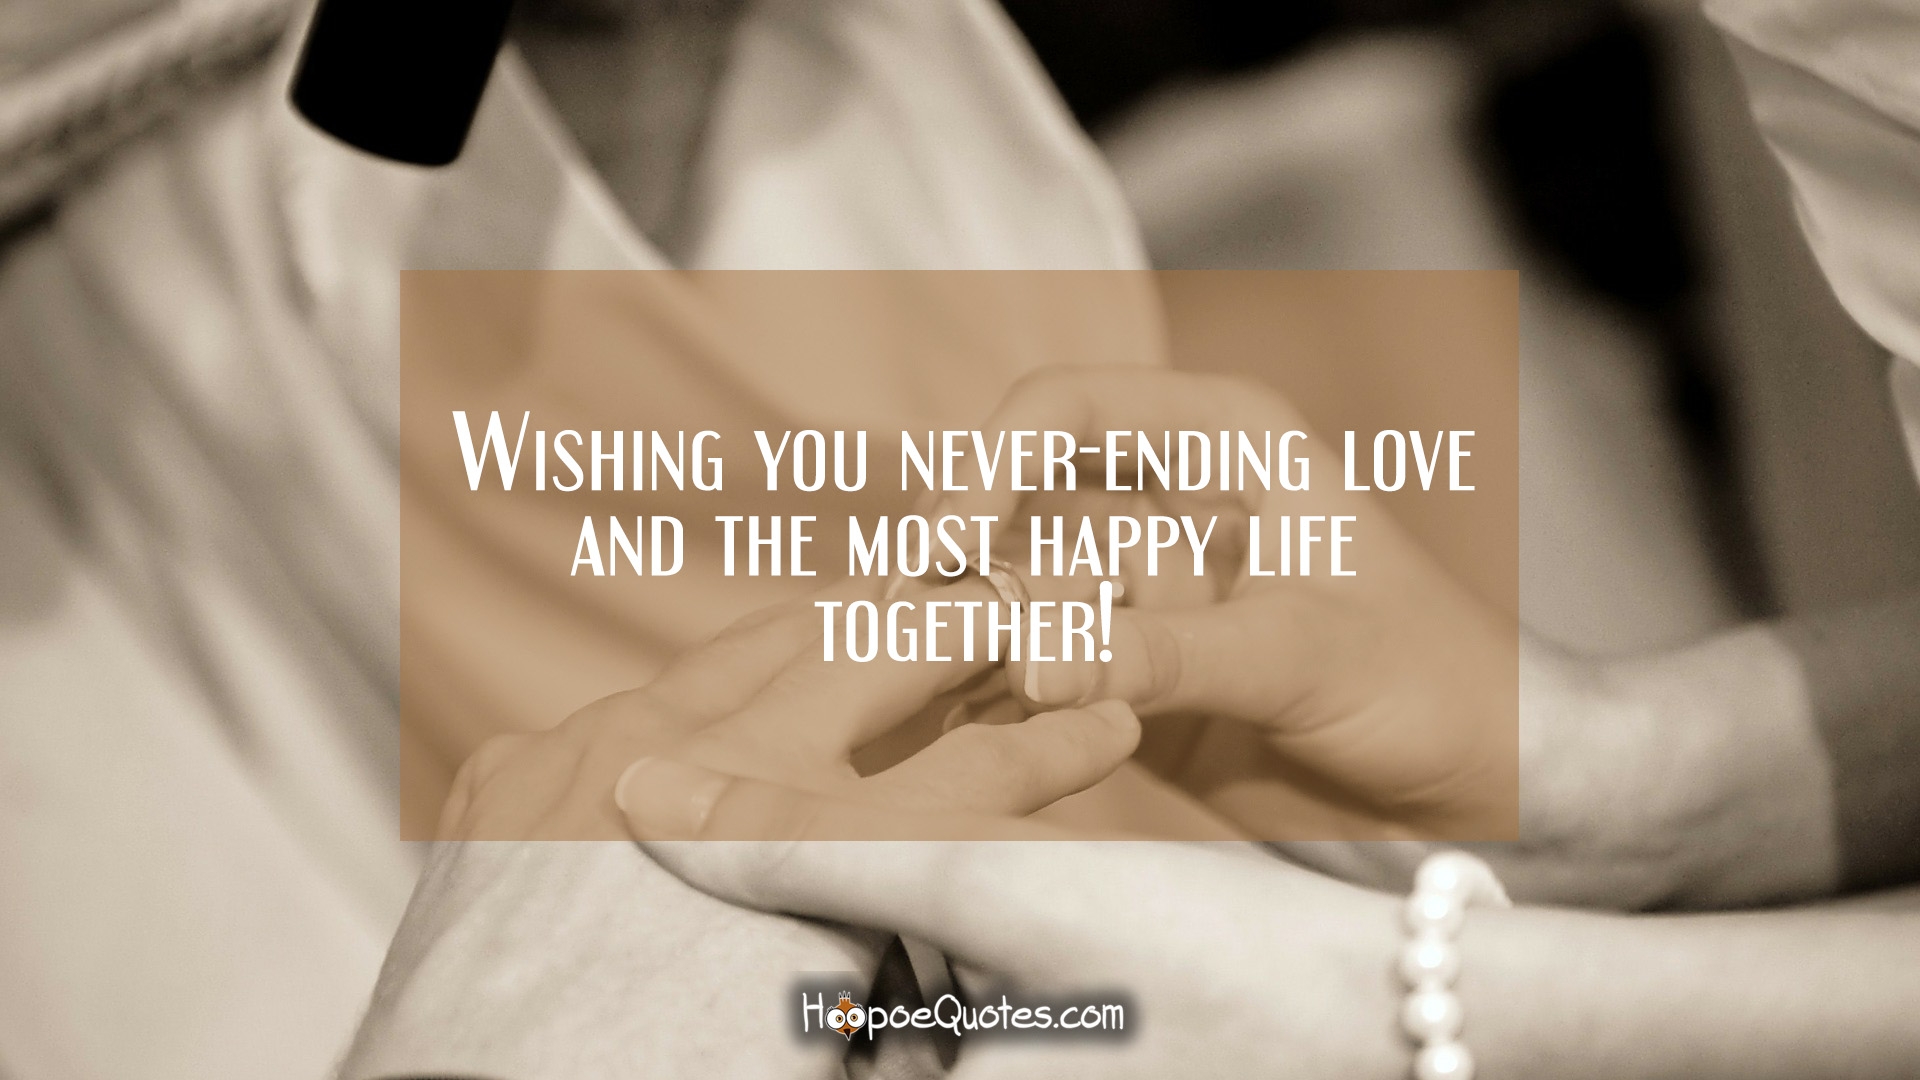 Wishing you never-ending love and the most happy life together ...